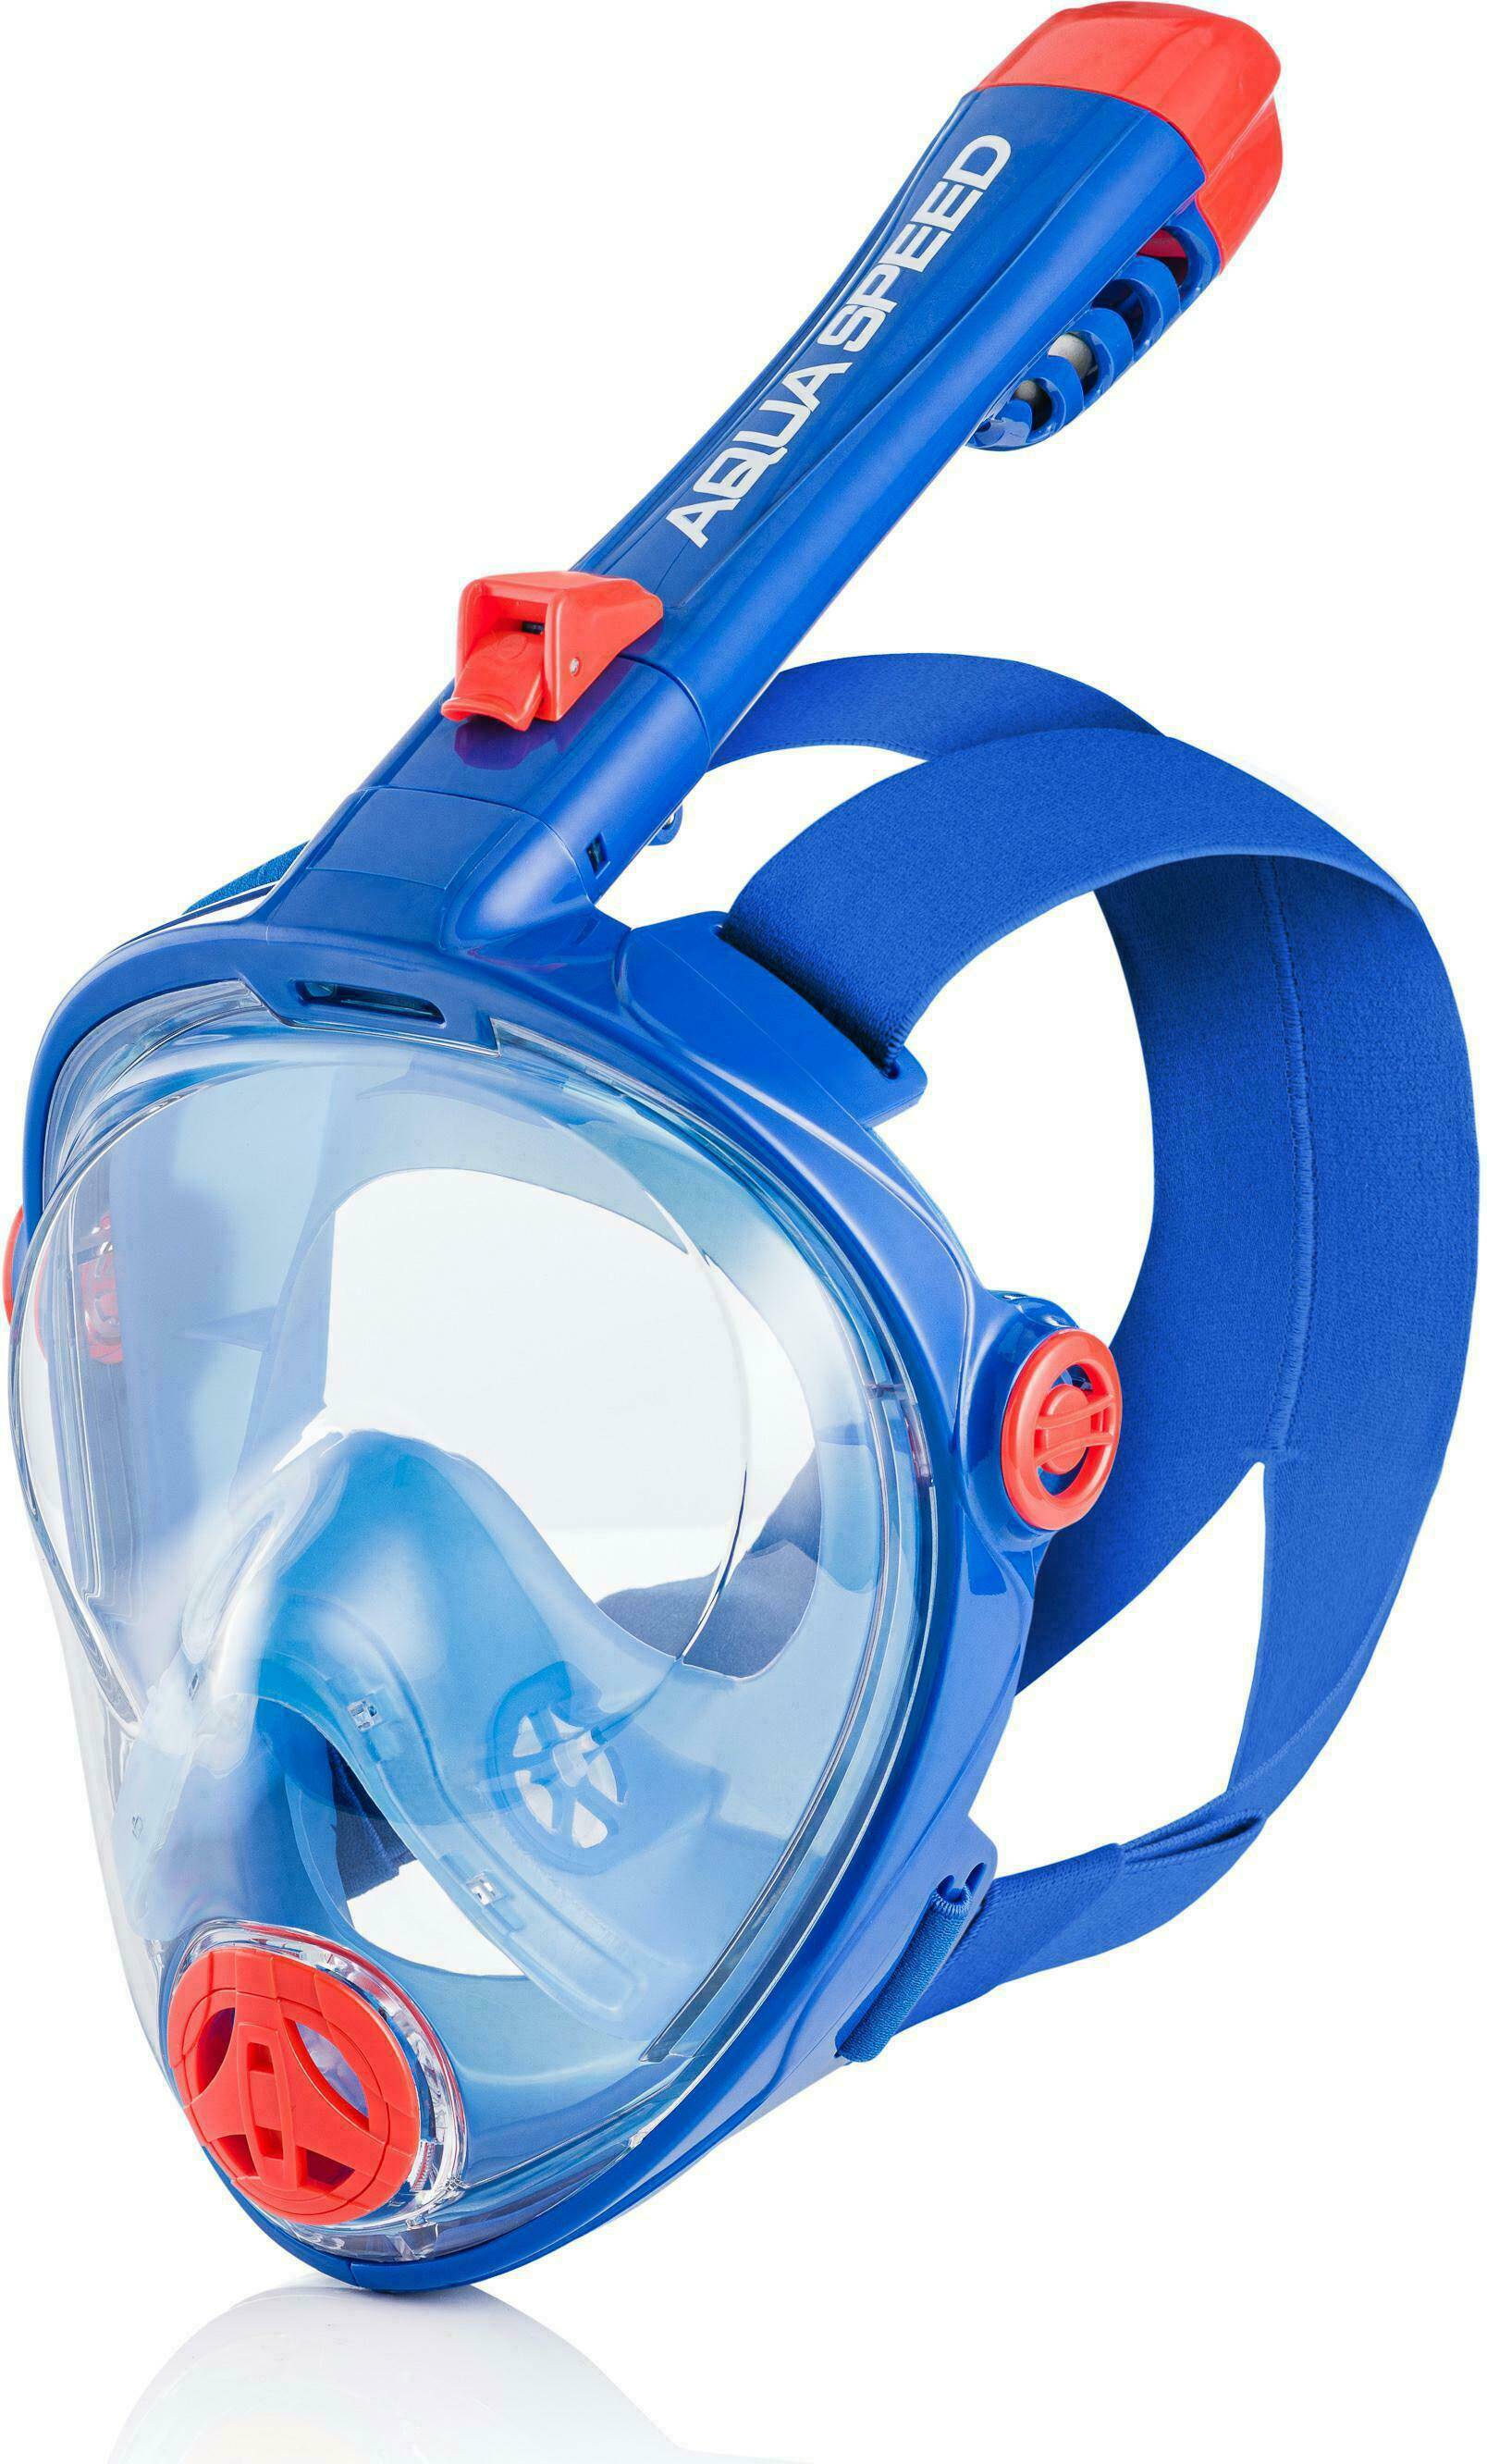 Full-face mask SPECTRA 2.0 KID size L col. 1